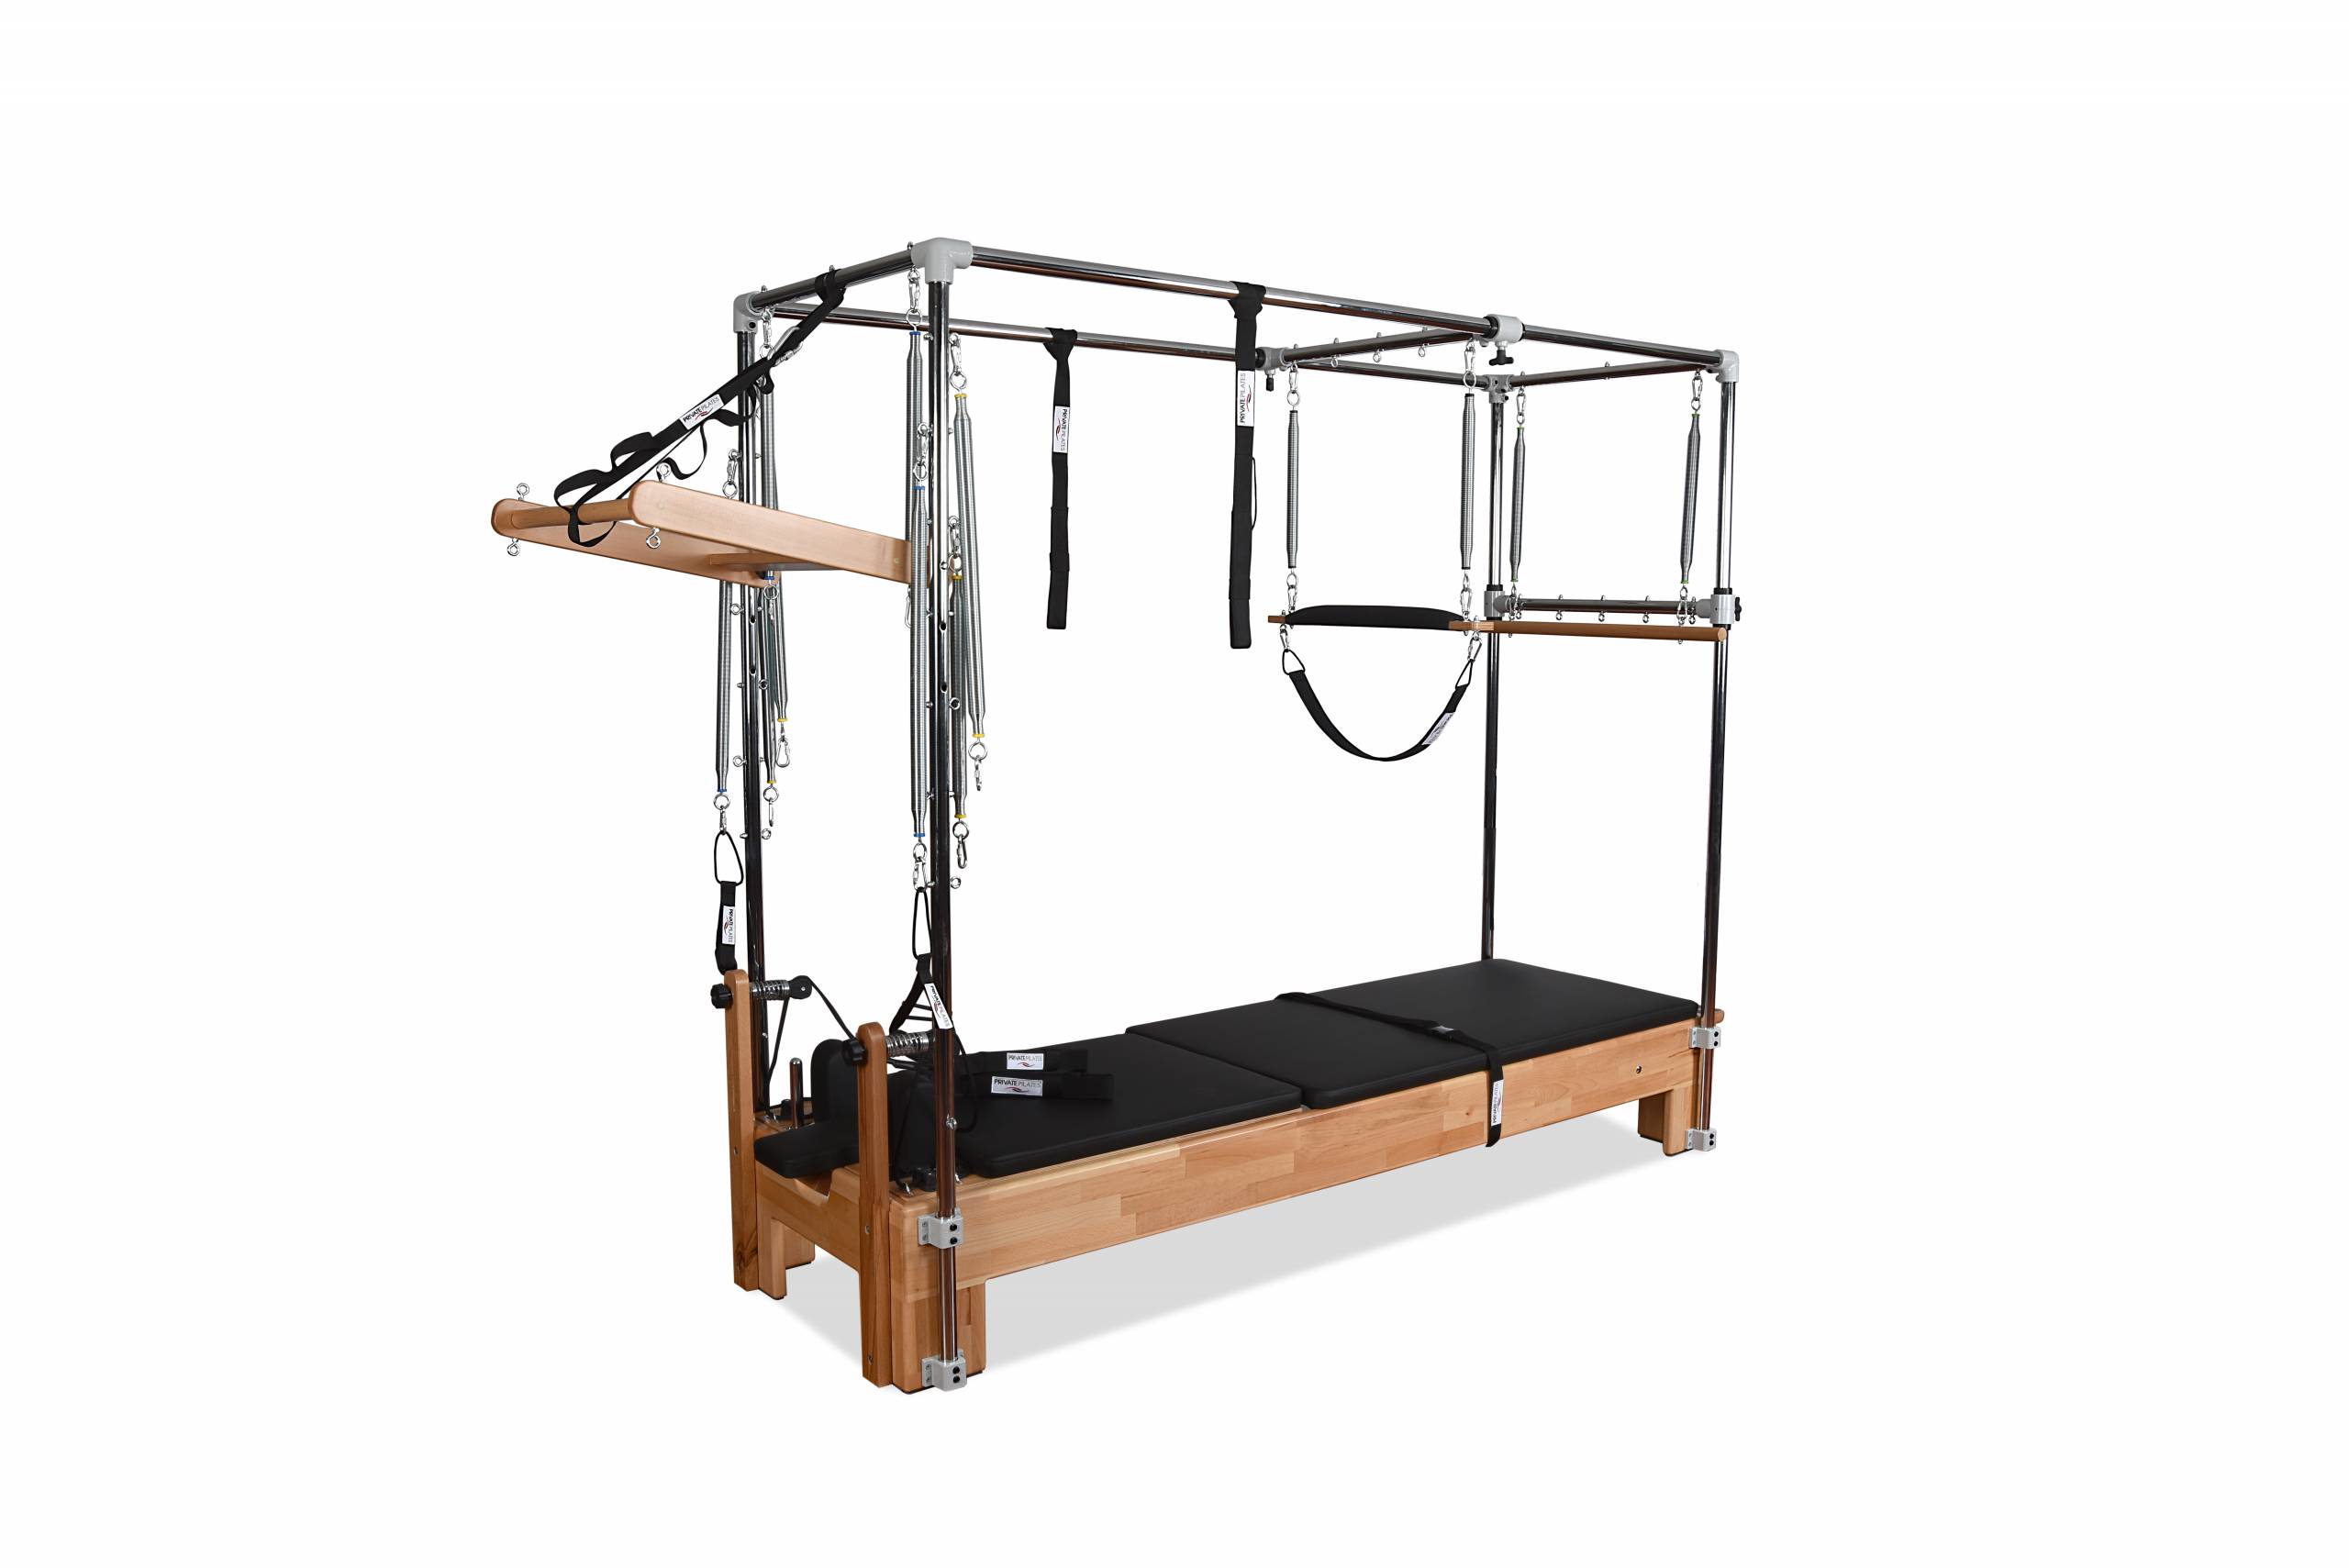 Buy Merrithew Cadillac Trapeze Table with Free Shipping – Pilates